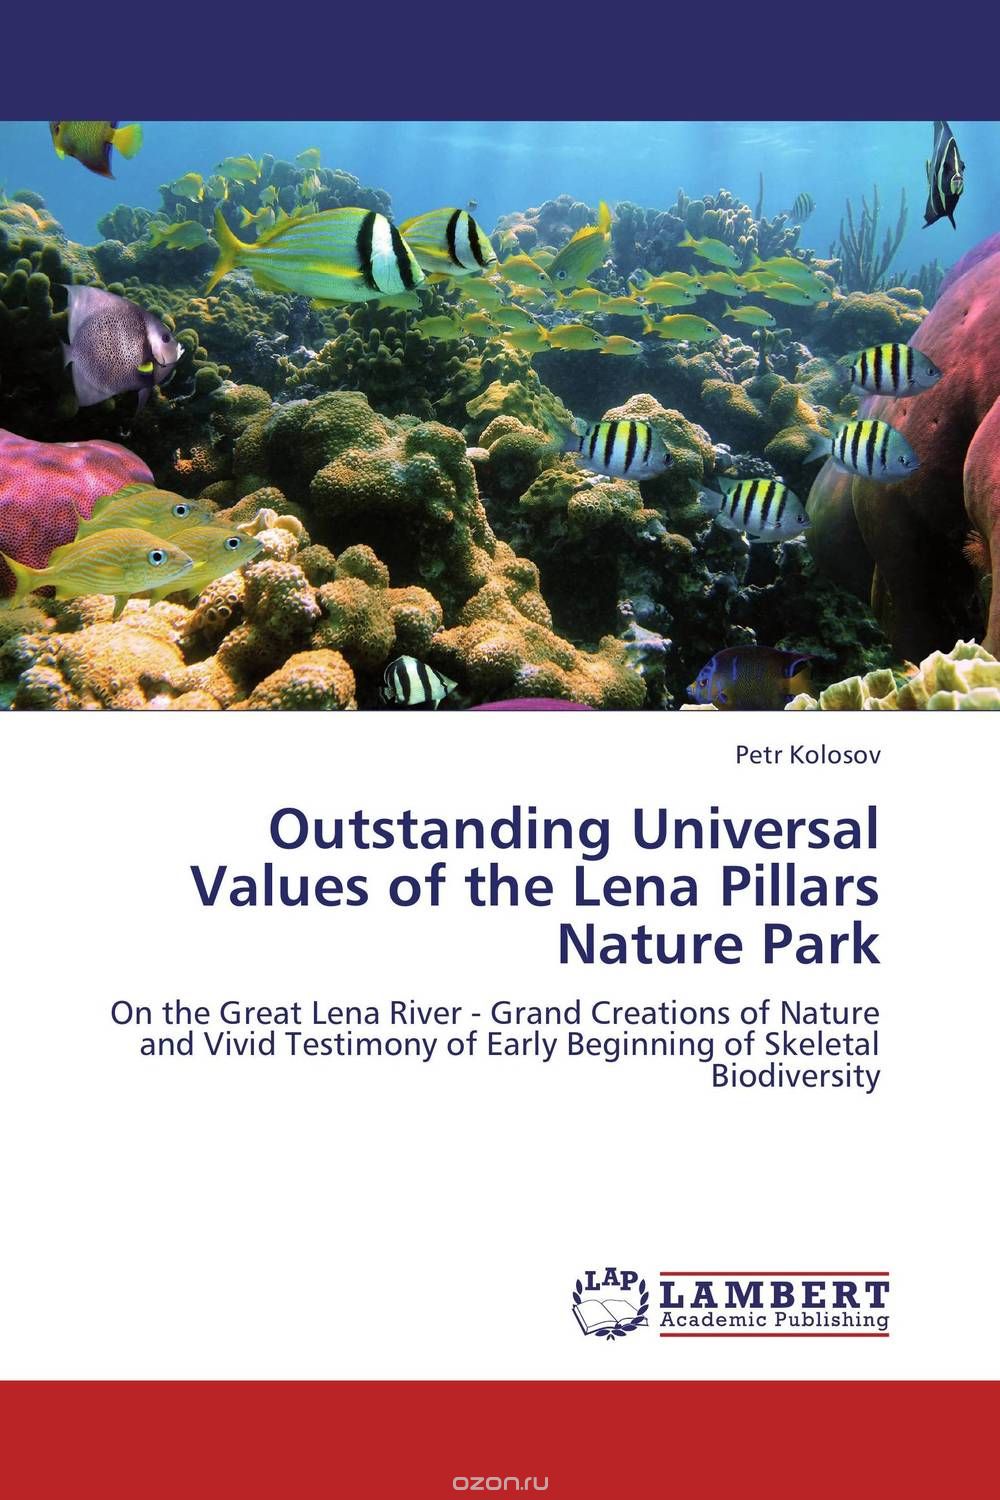 Outstanding Universal Values of the Lena Pillars Nature Park